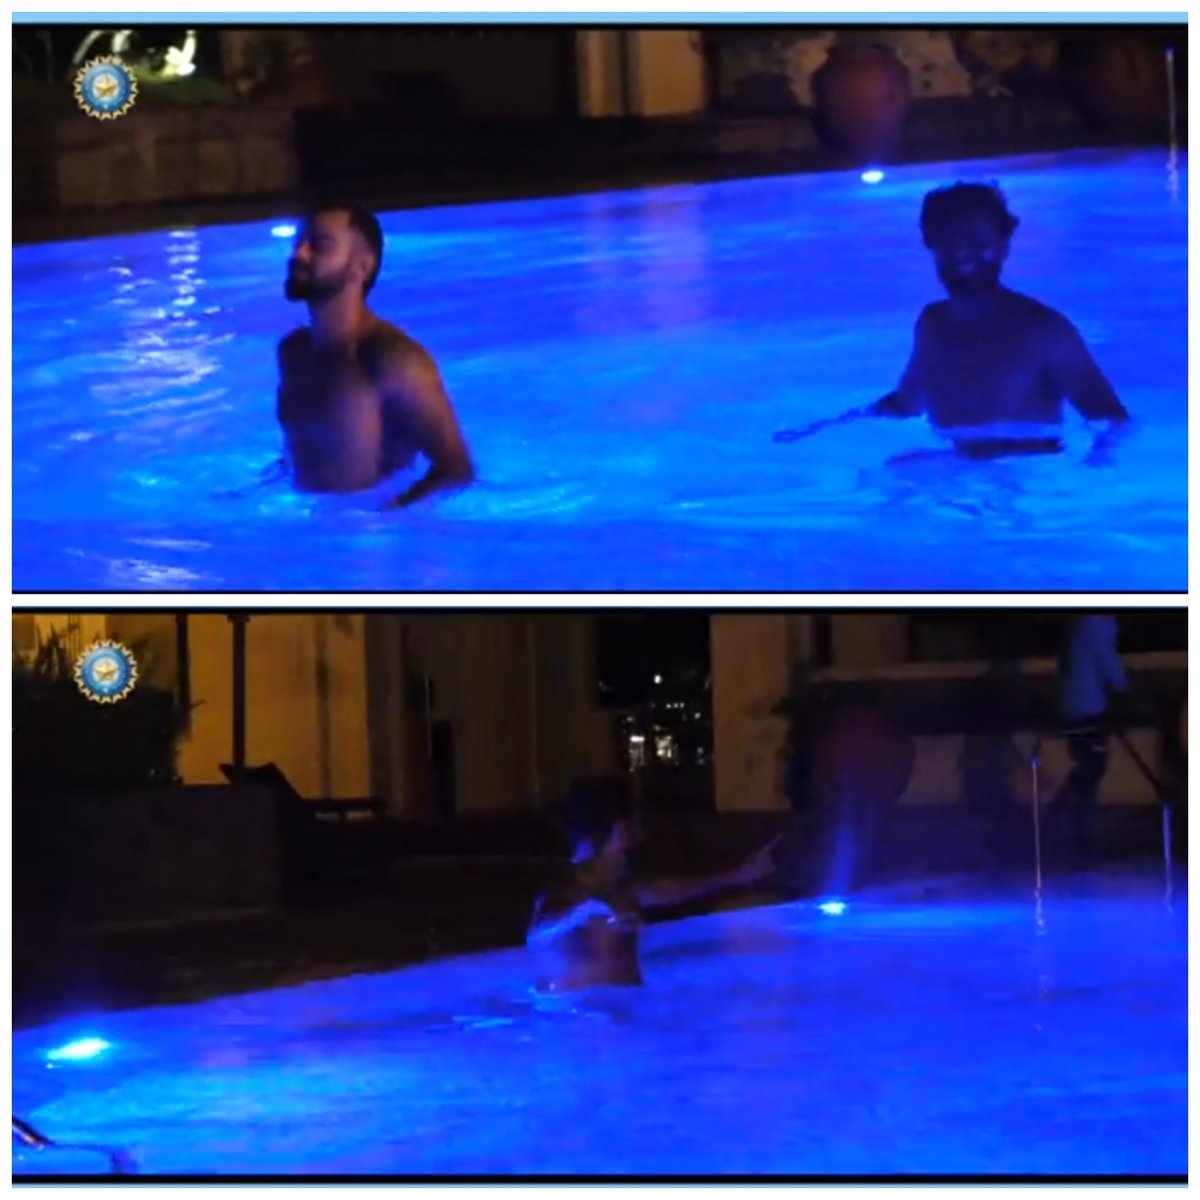 Virat Kohli and Rohit Sharma having fun in the pool and dancing after an amazing victory over Pakistan.